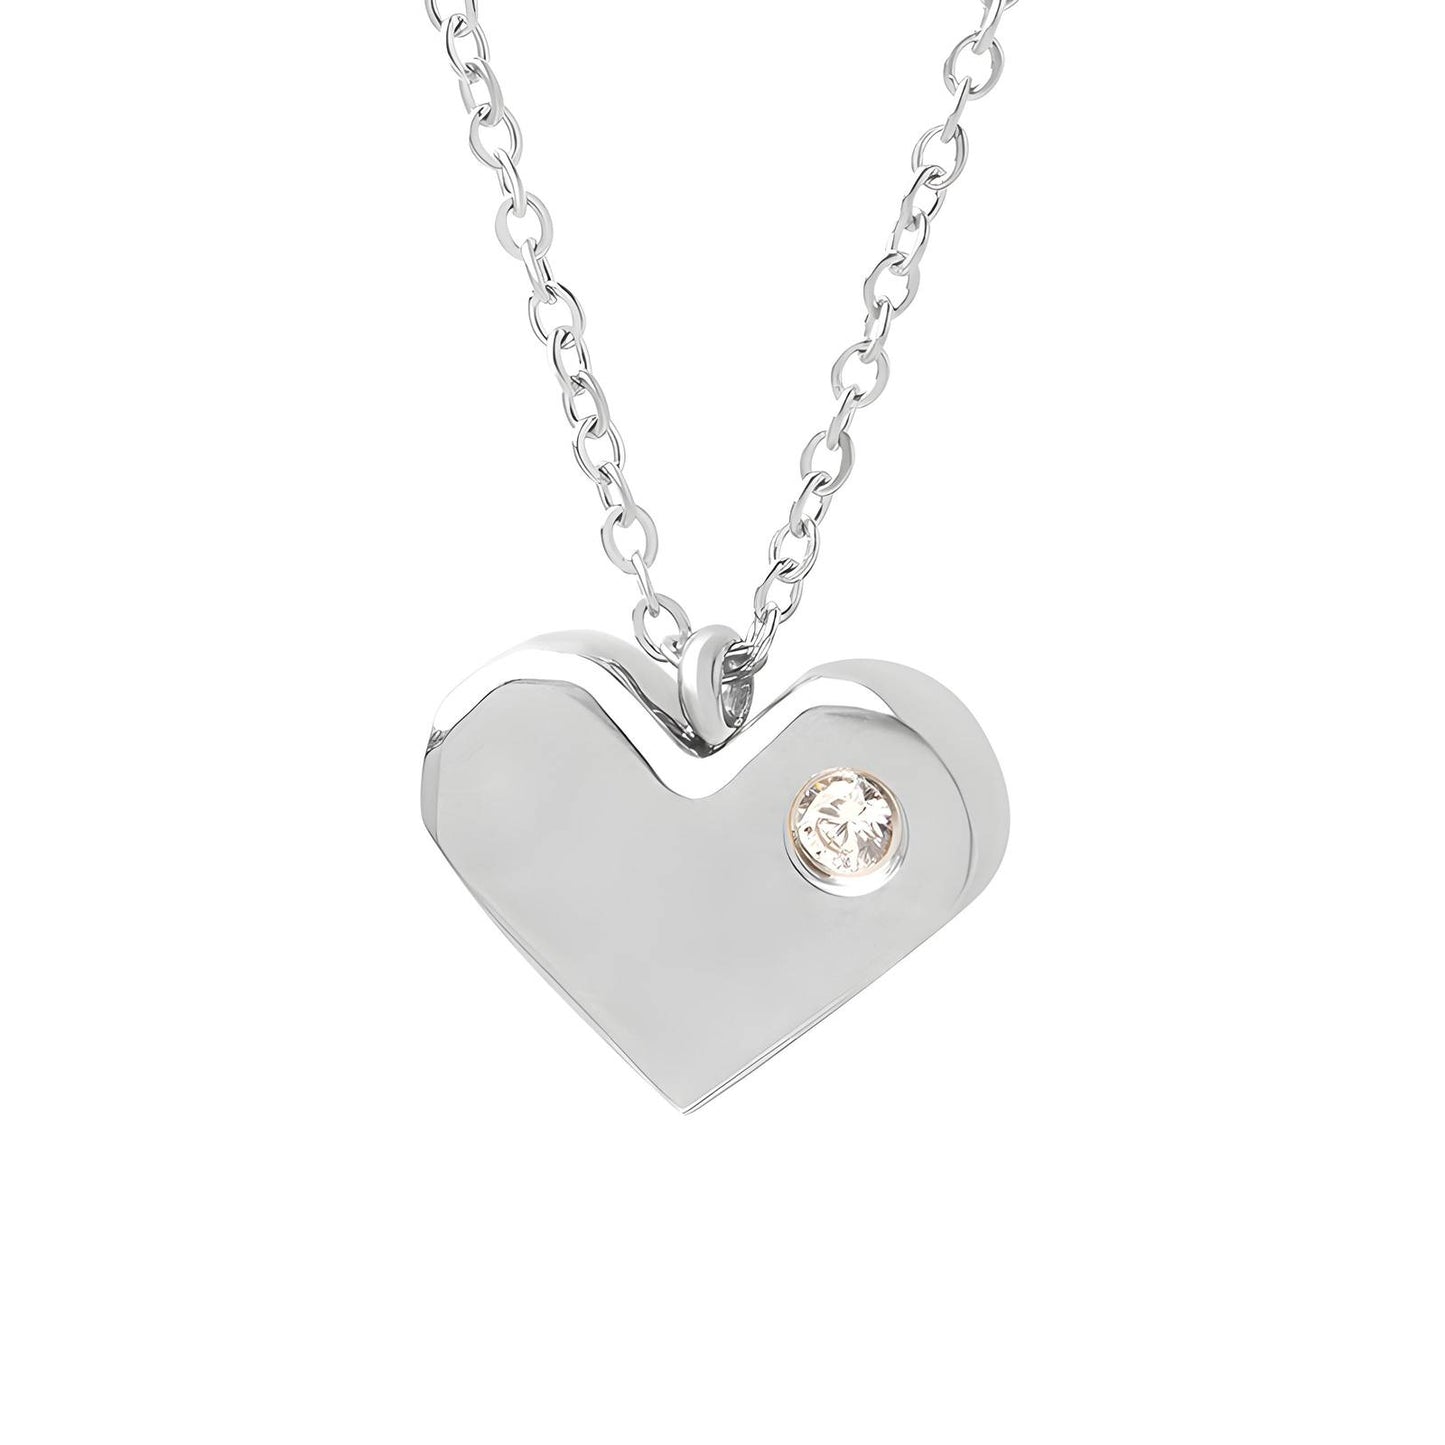 Stainless steel  Heart necklace